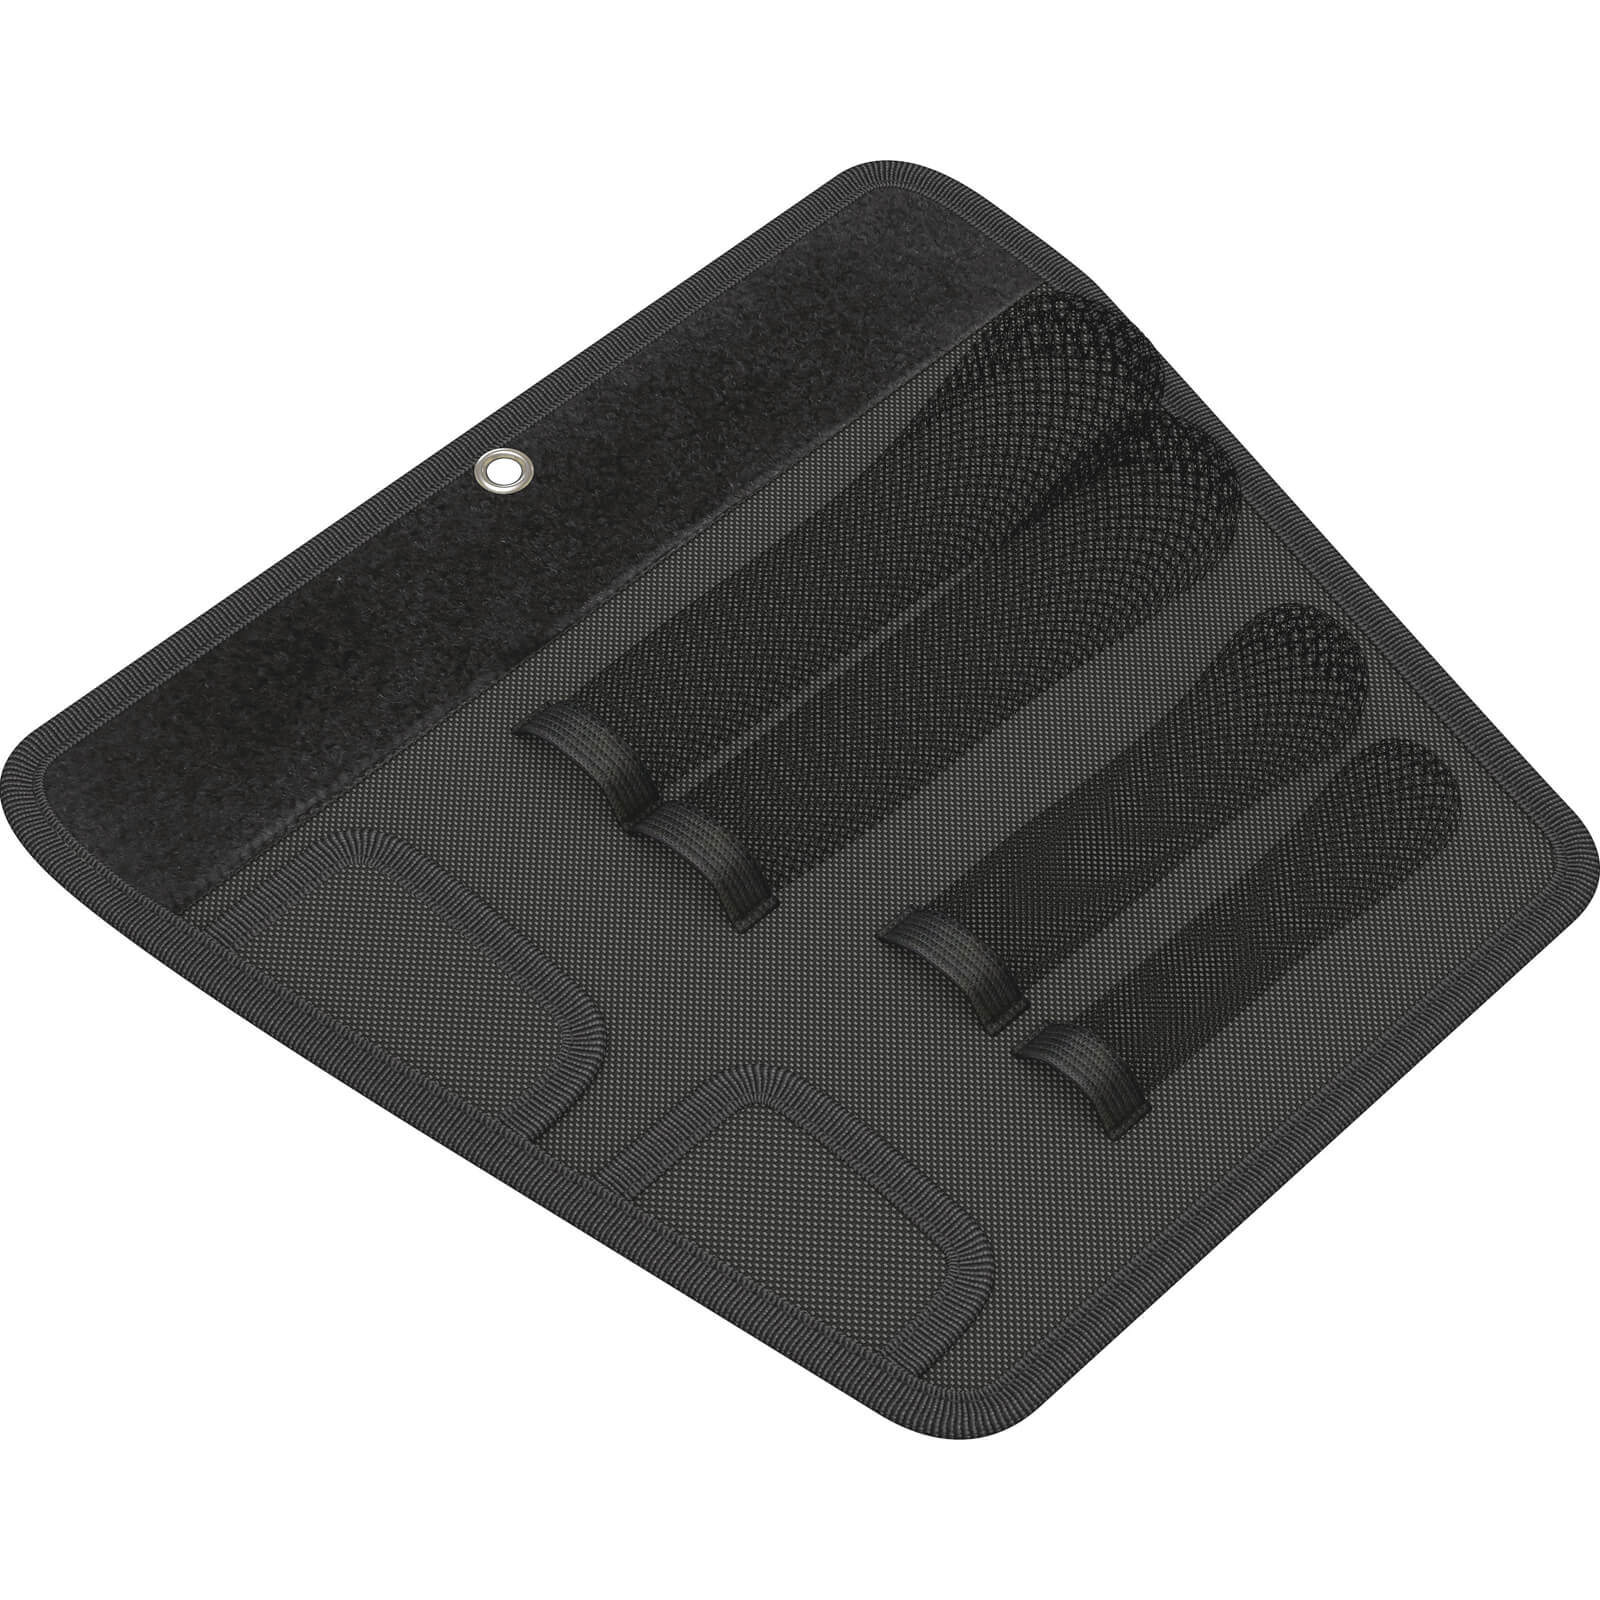 Wera 2Go Tool Pouch for 4 Joker Spanners